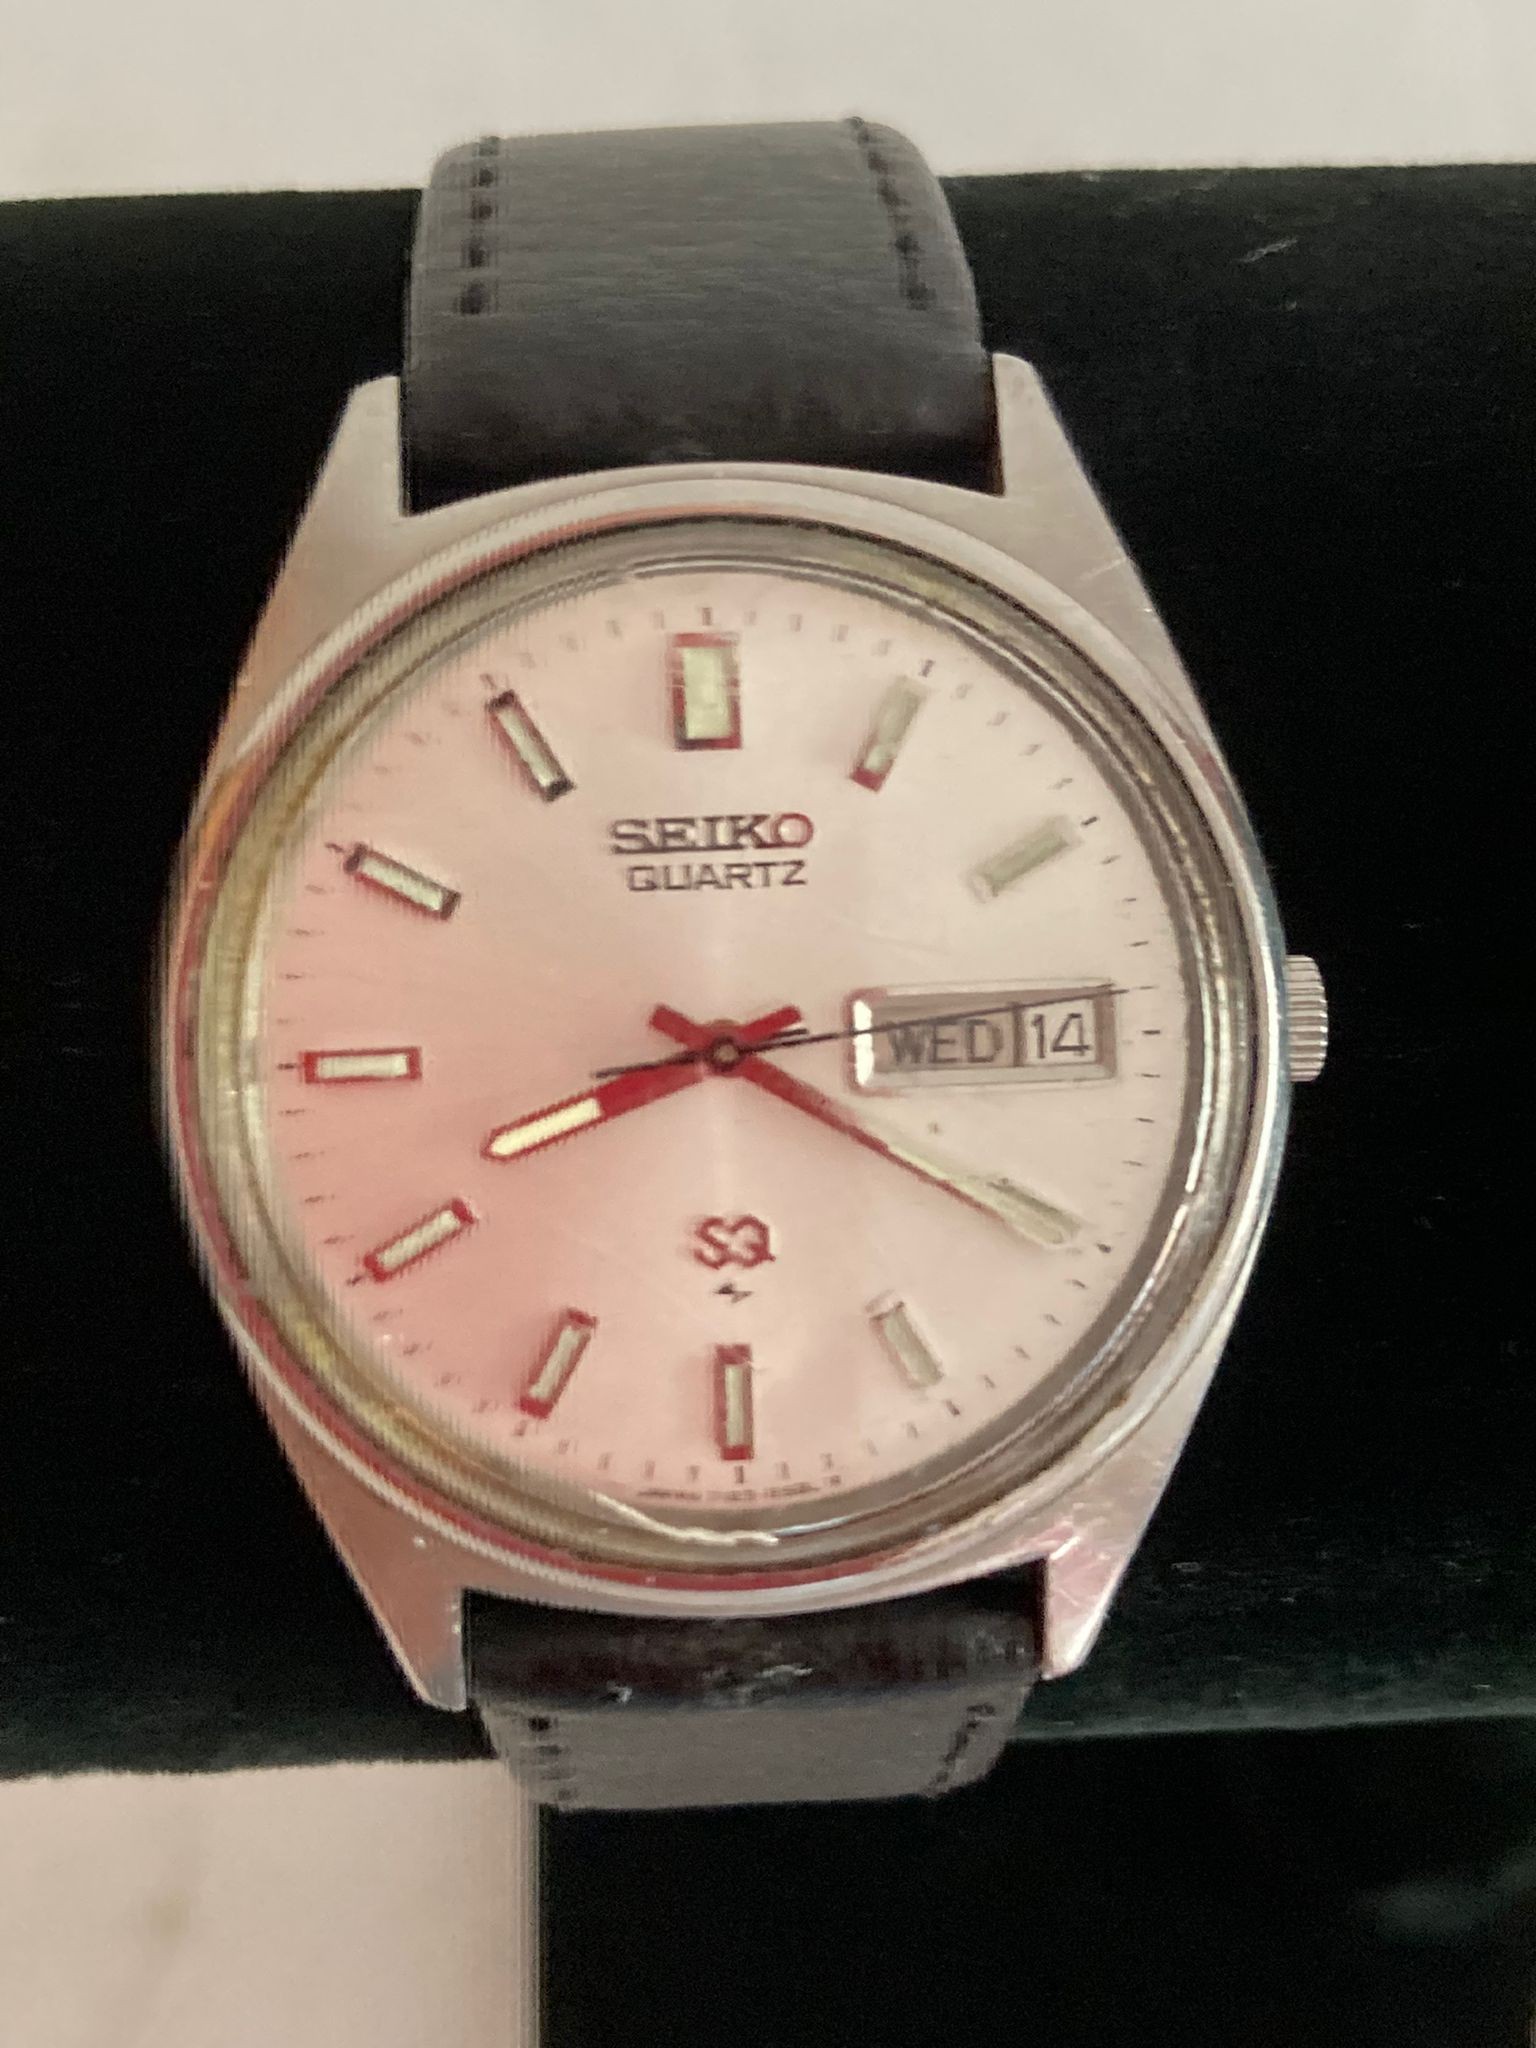 Gentlemans SEIKO Quartz wristwatch in silver tone.DAY/DATE model with luminous digits and hands.